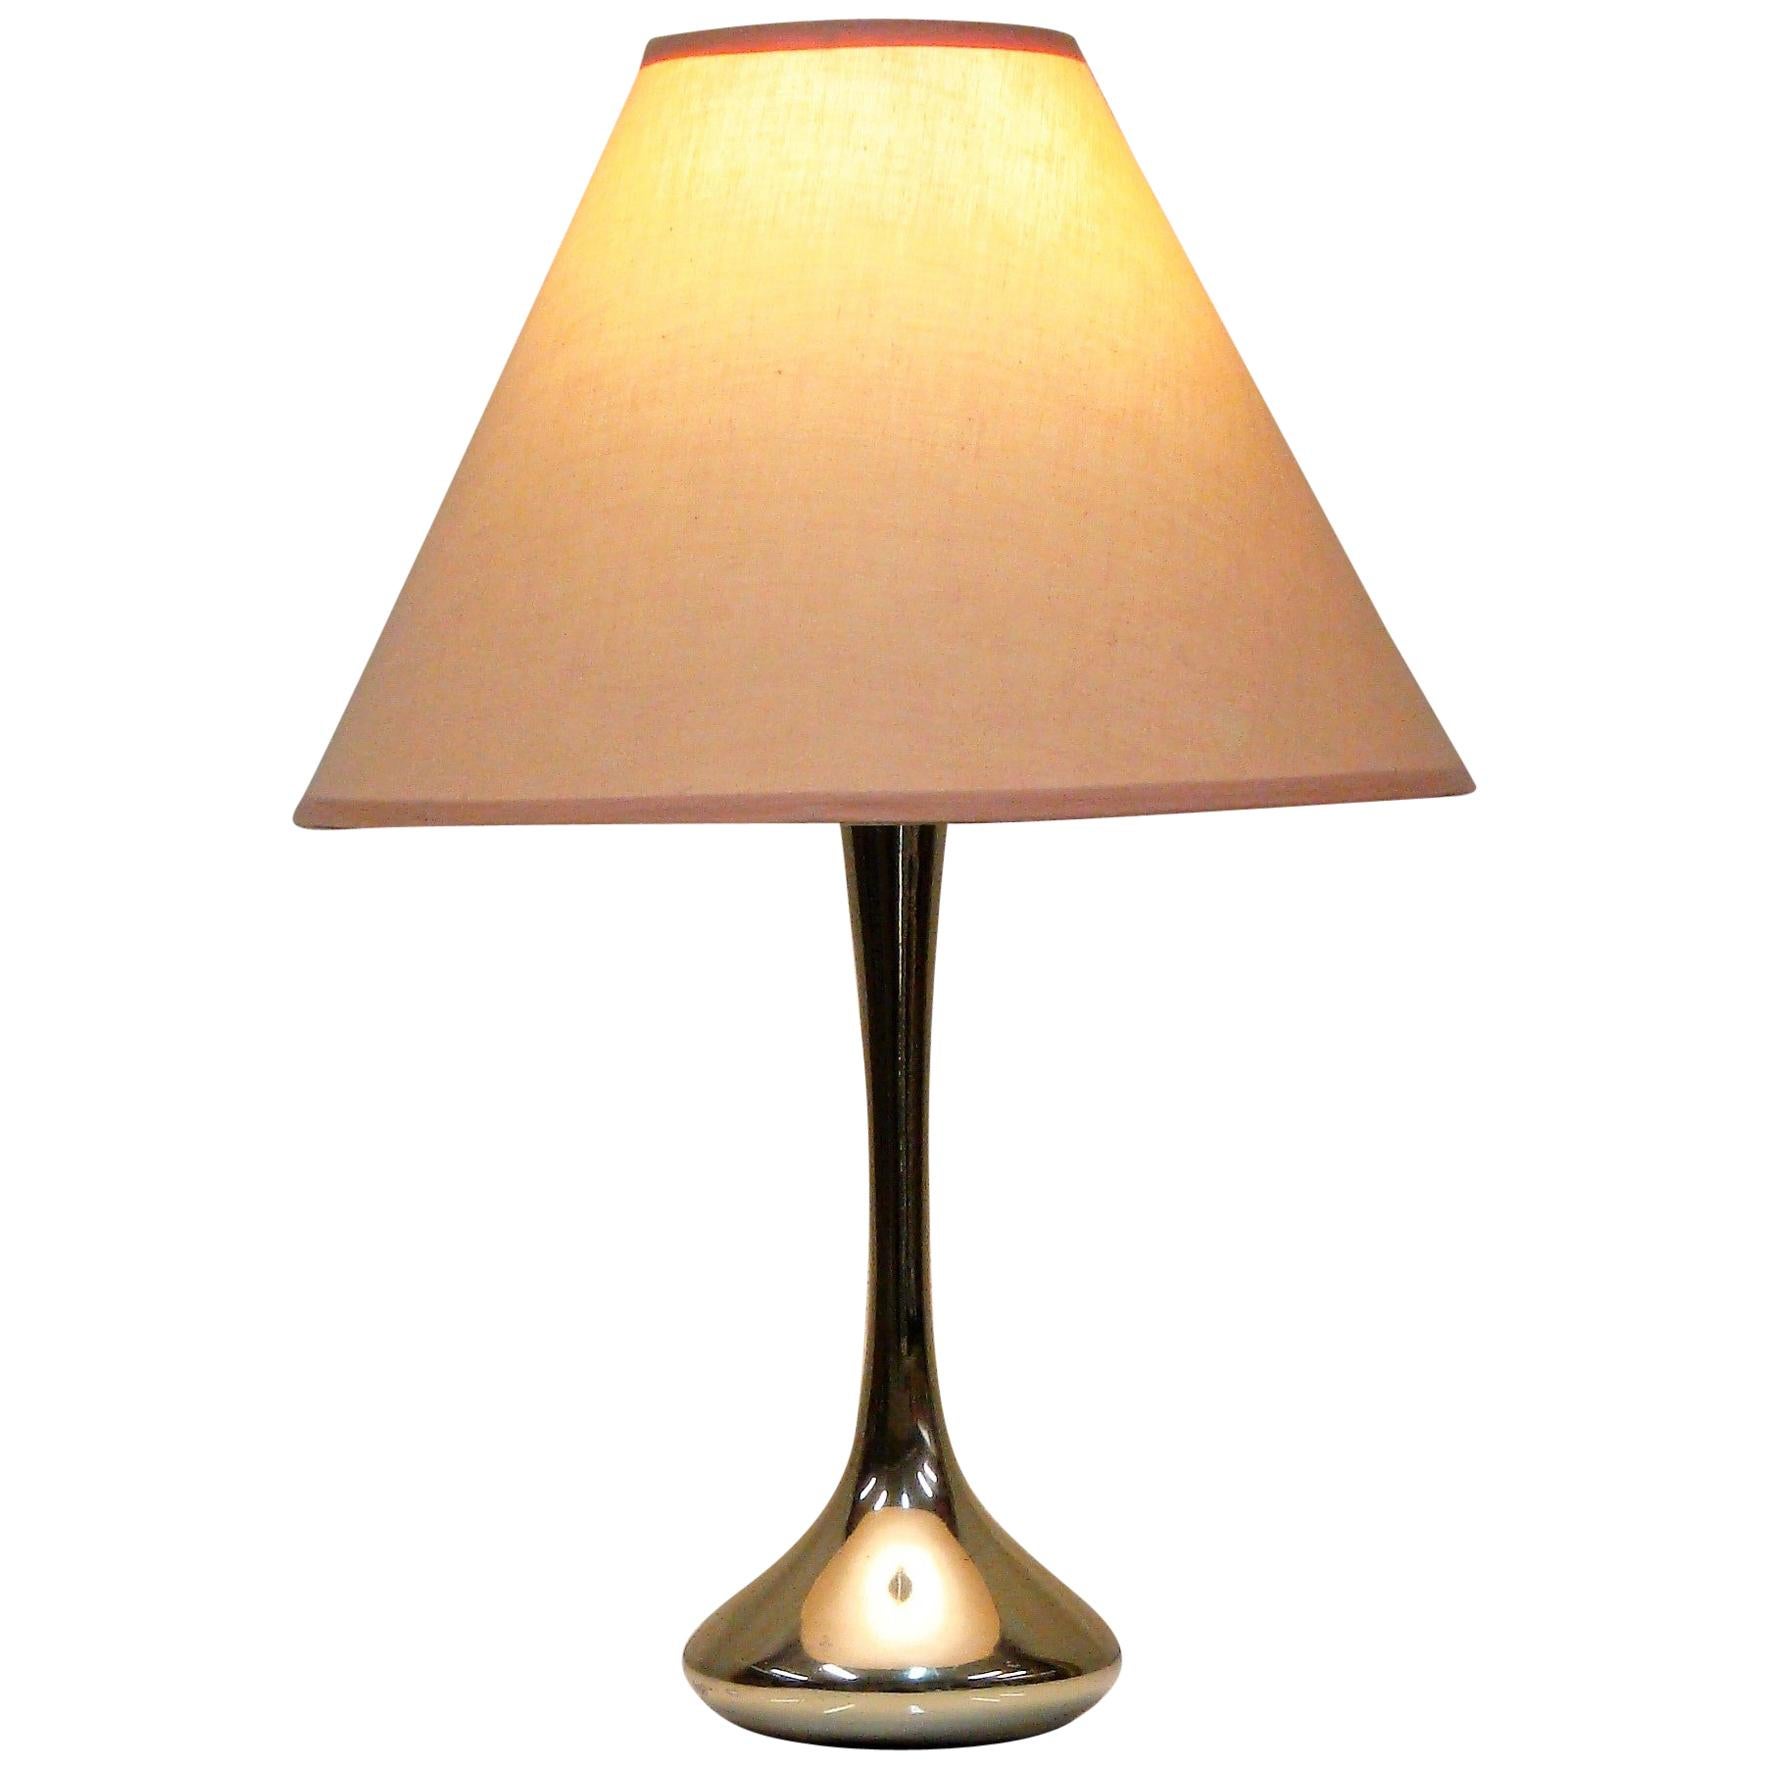 Gold Laurel Brass Table Lamp Attributed to Gio Ponti, circa 1960s